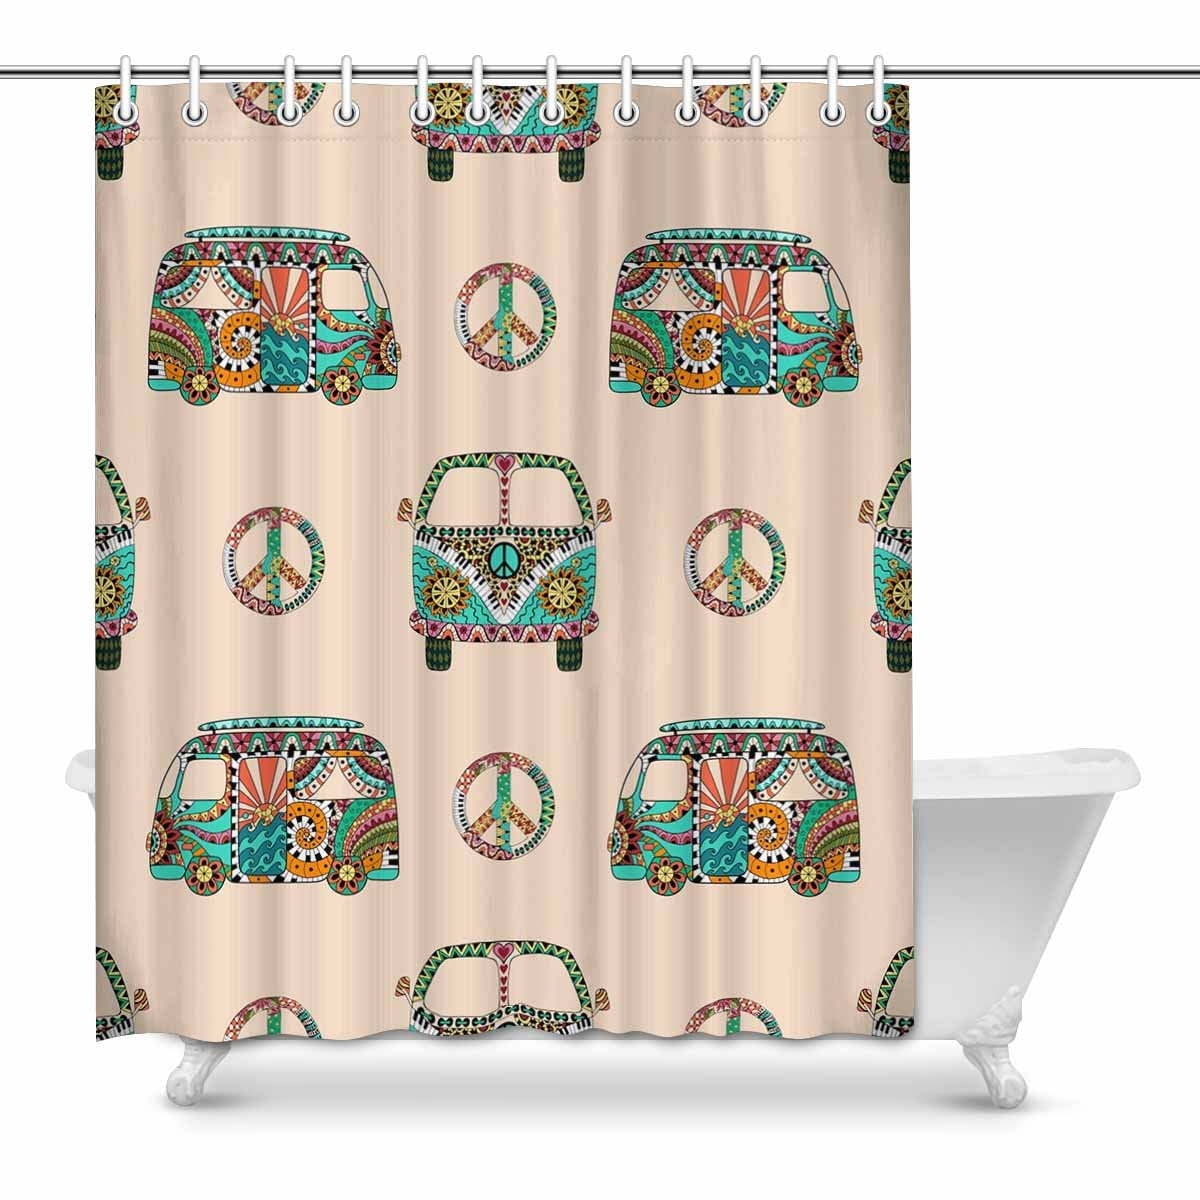 Live Peace Waterproof Bathroom Polyester Shower Curtain Liner Water Resistant 